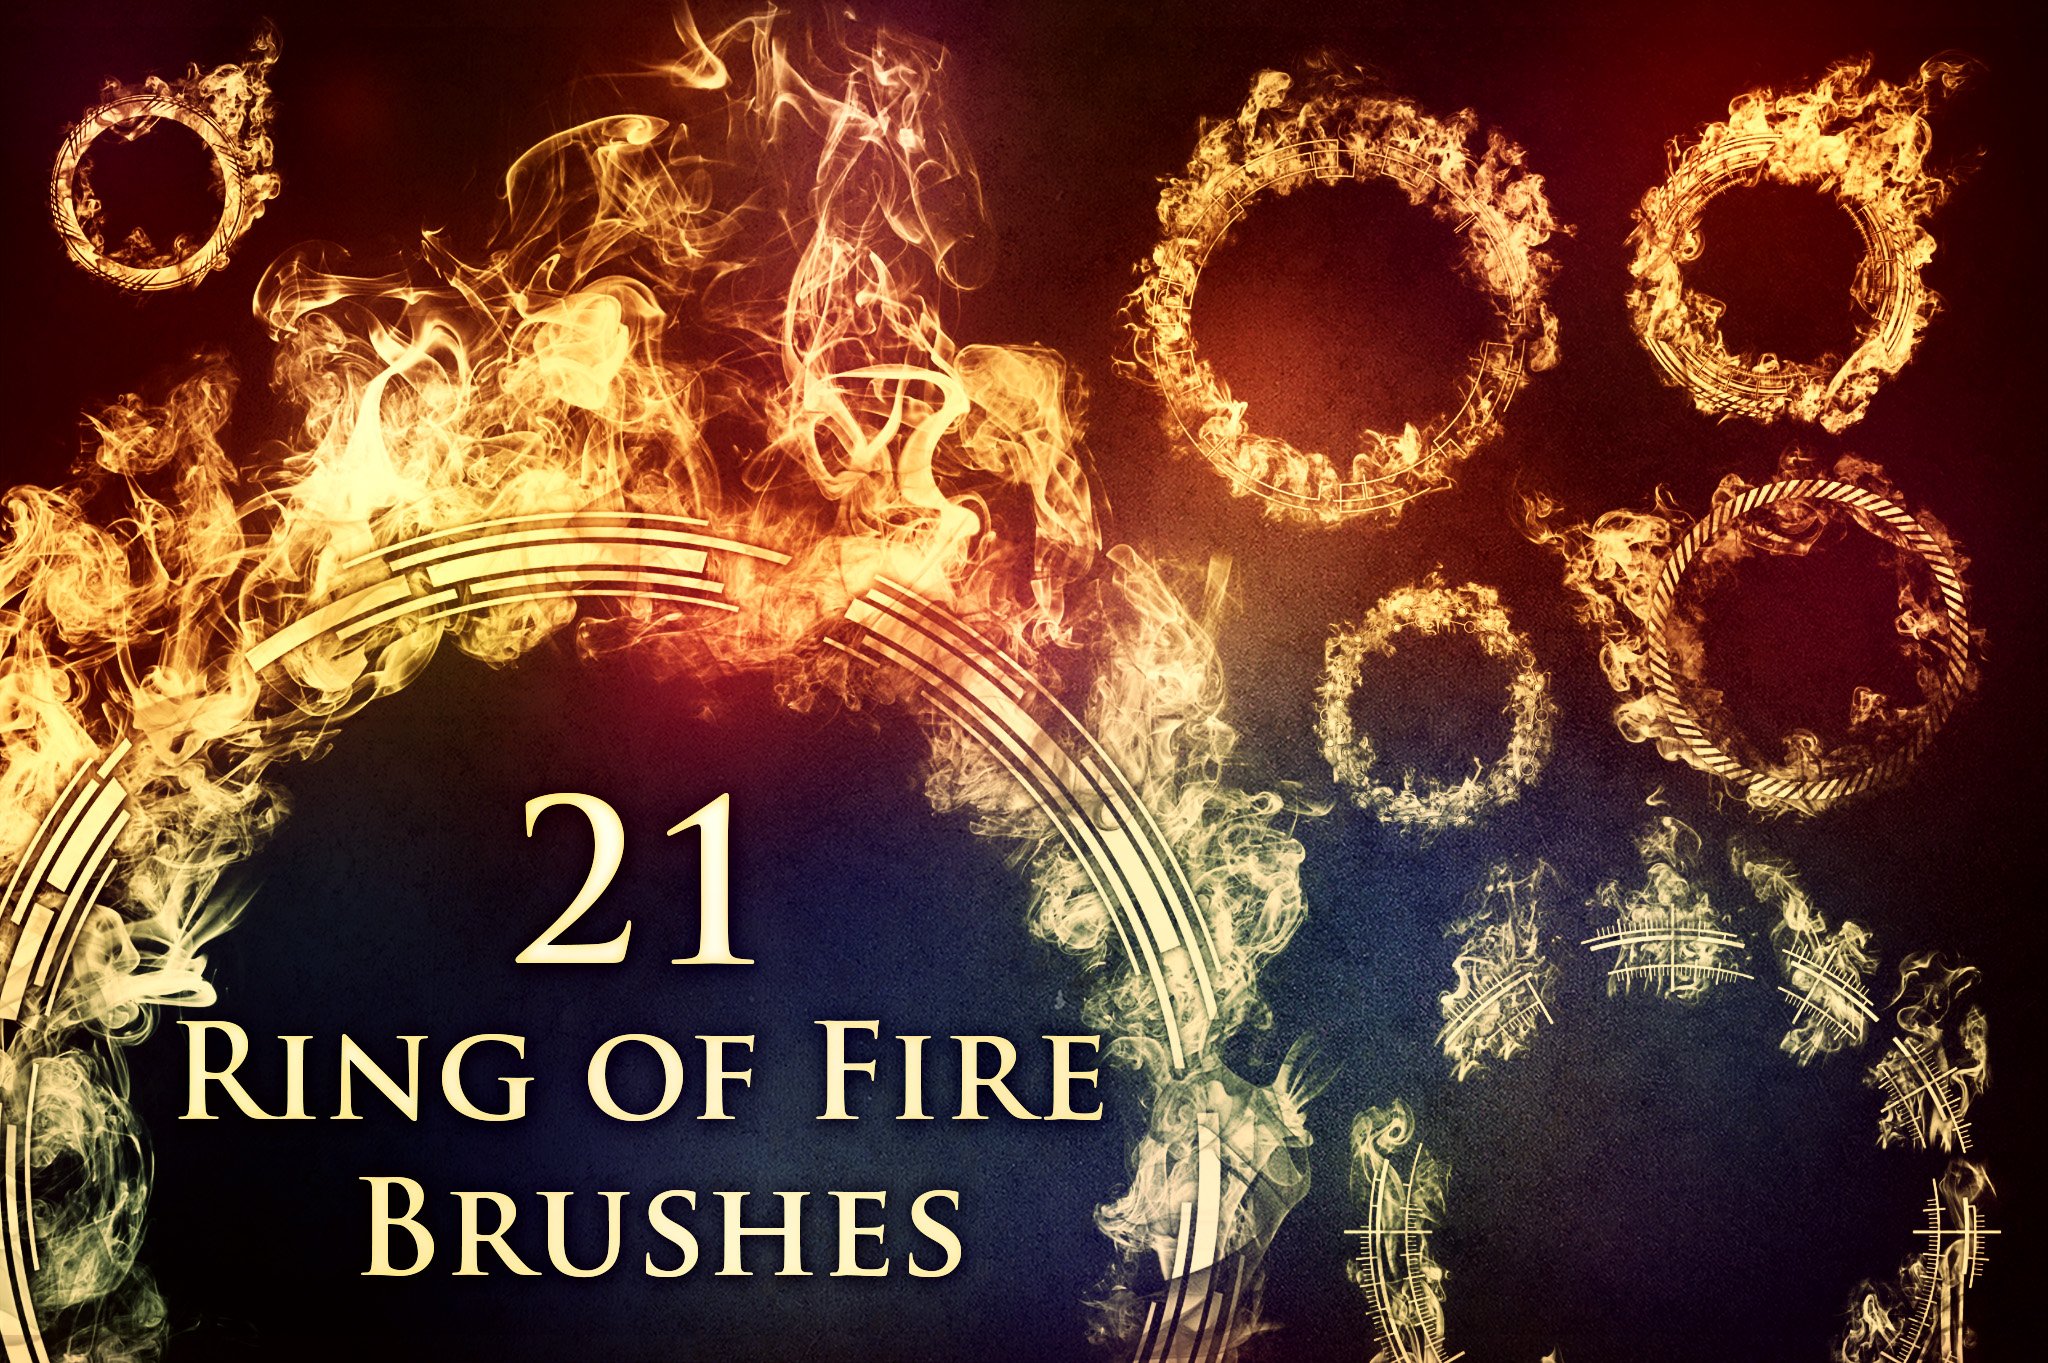 21 Ring of Fire Brushescover image.